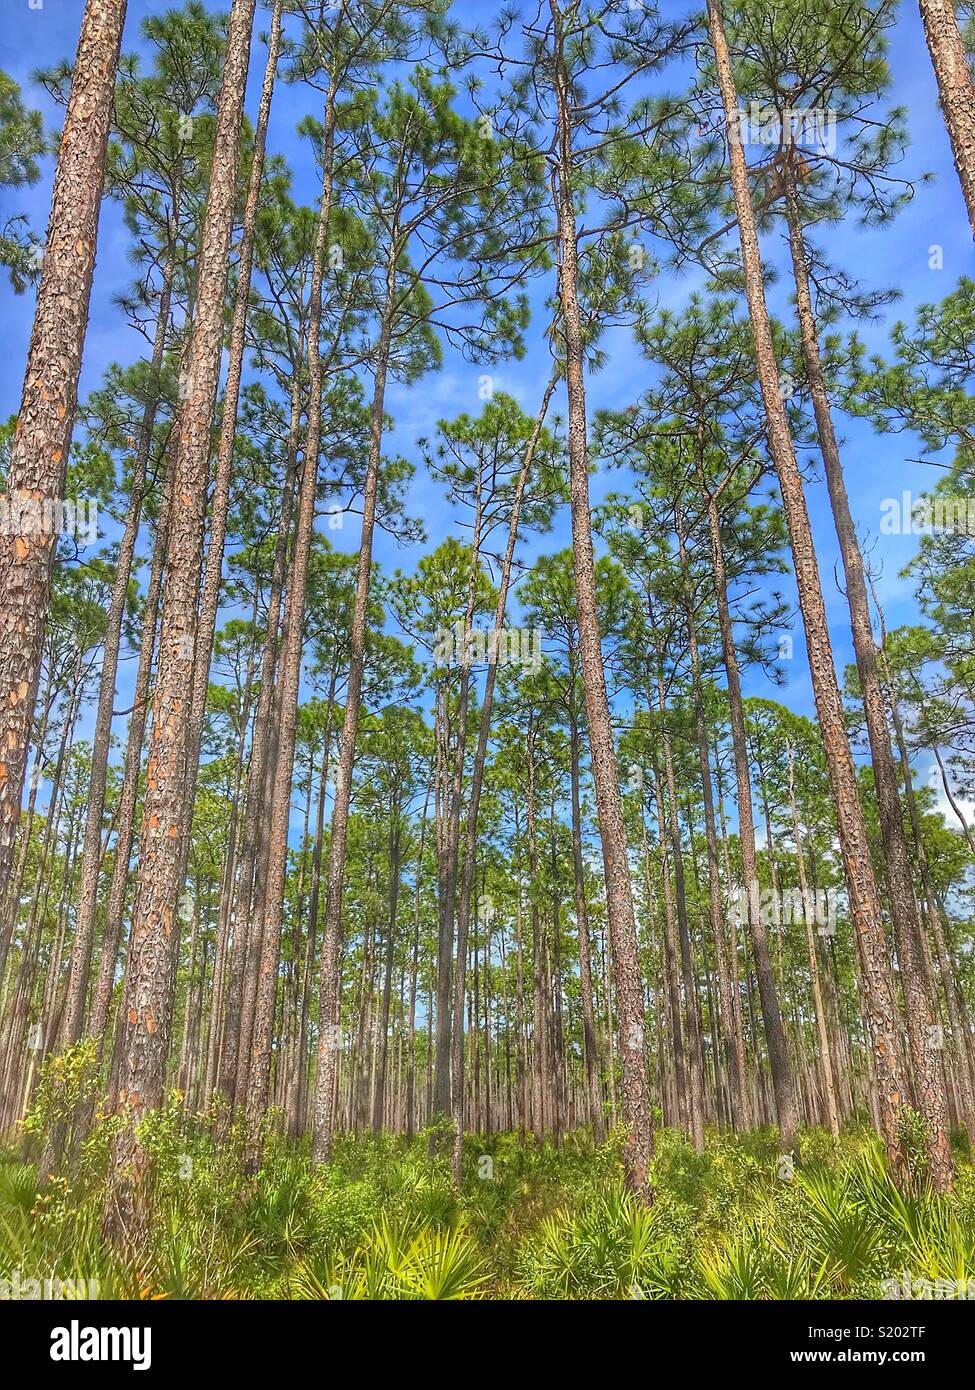 Tall pine trees and scrub palms, Osceola National Forest Stock Photo